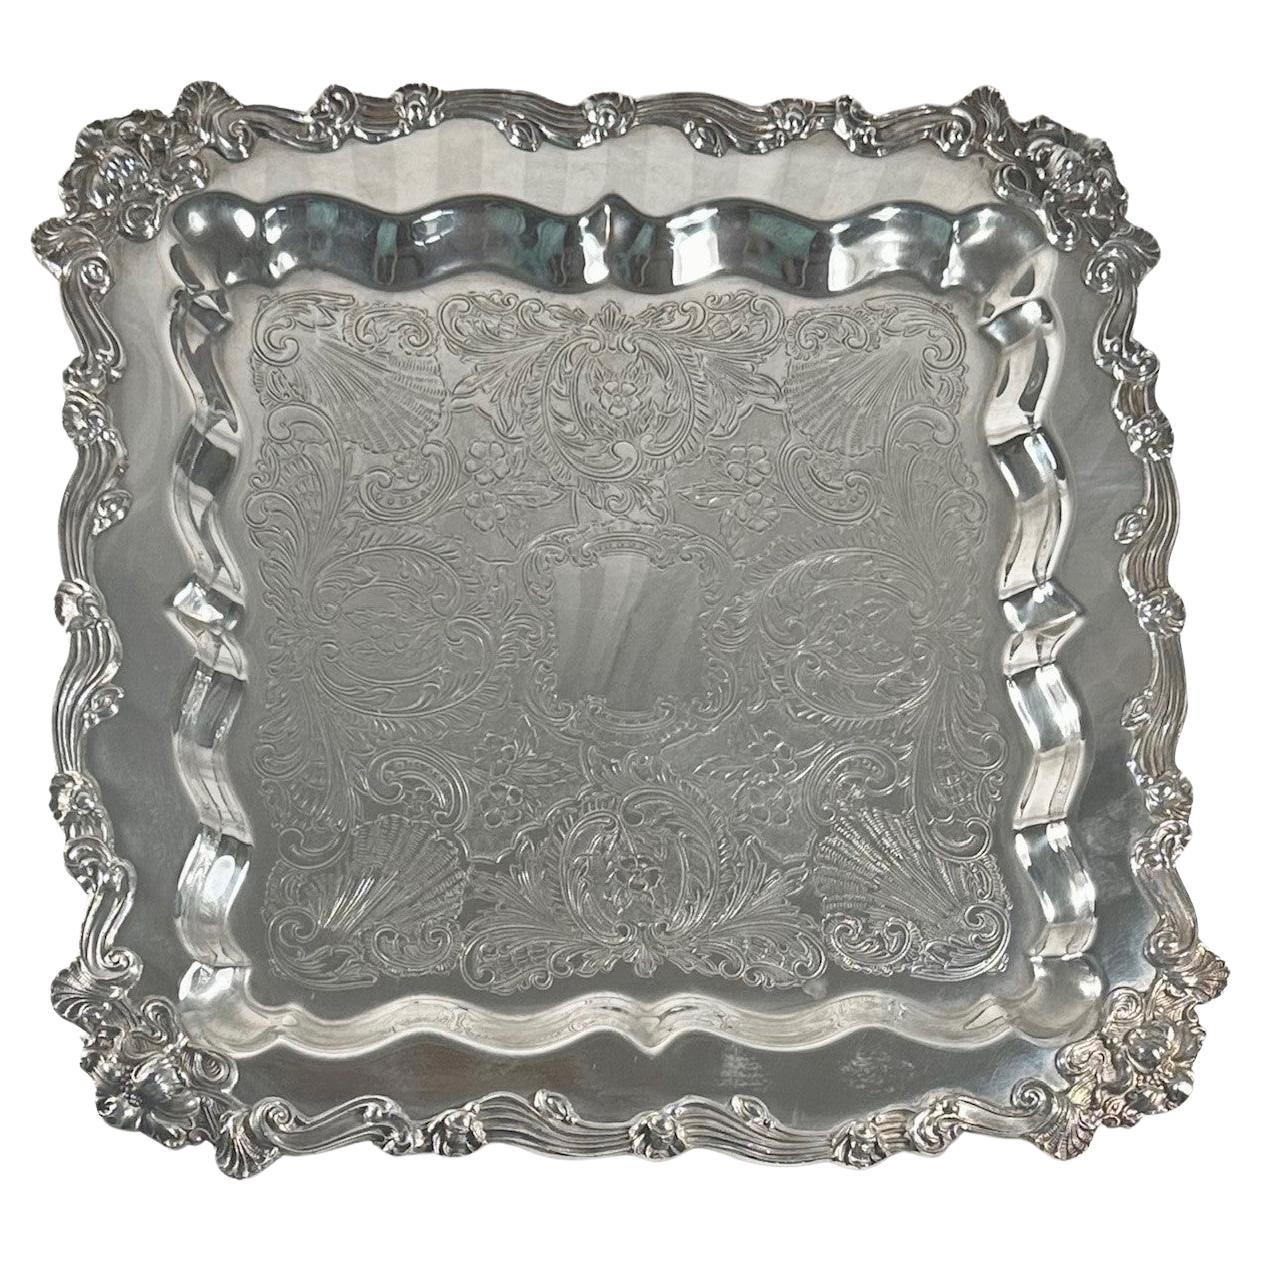 20th Century Ornate Square Footed Silver Plate Serving Tray.